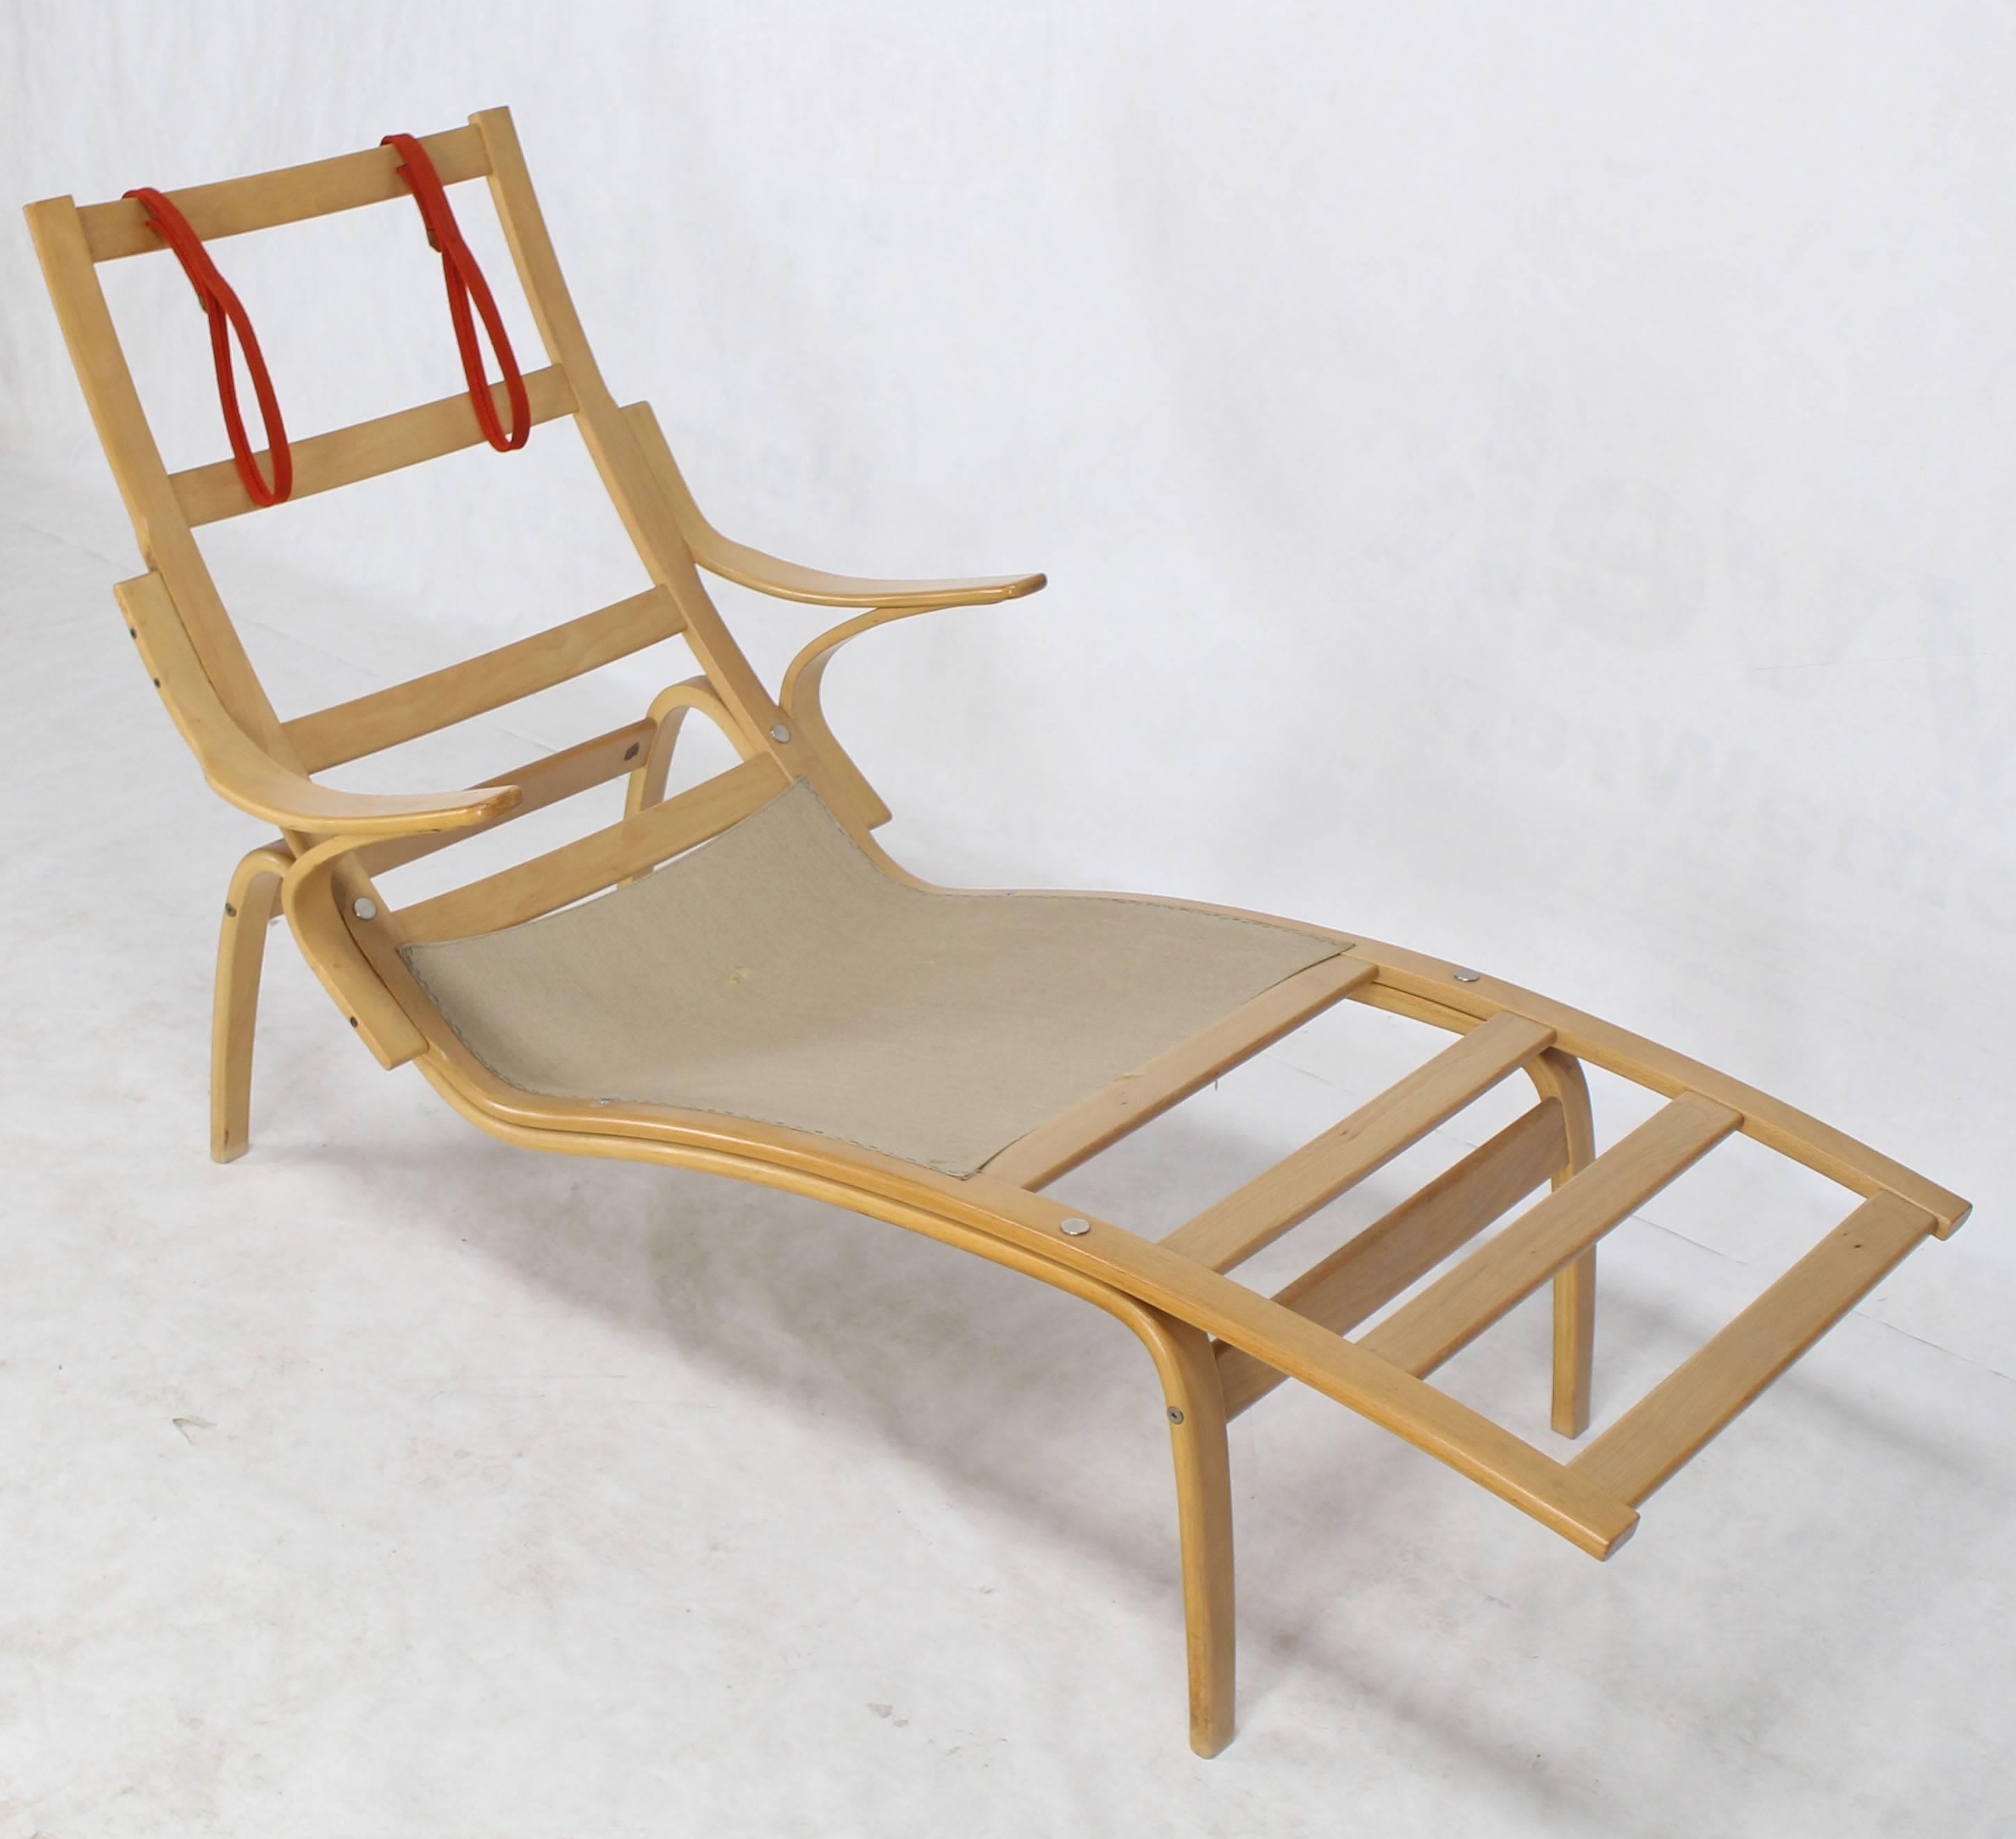 20th Century Bentwood Wool Upholstery Chaise Lounge Chair by Alvar Aalto for Artek  For Sale